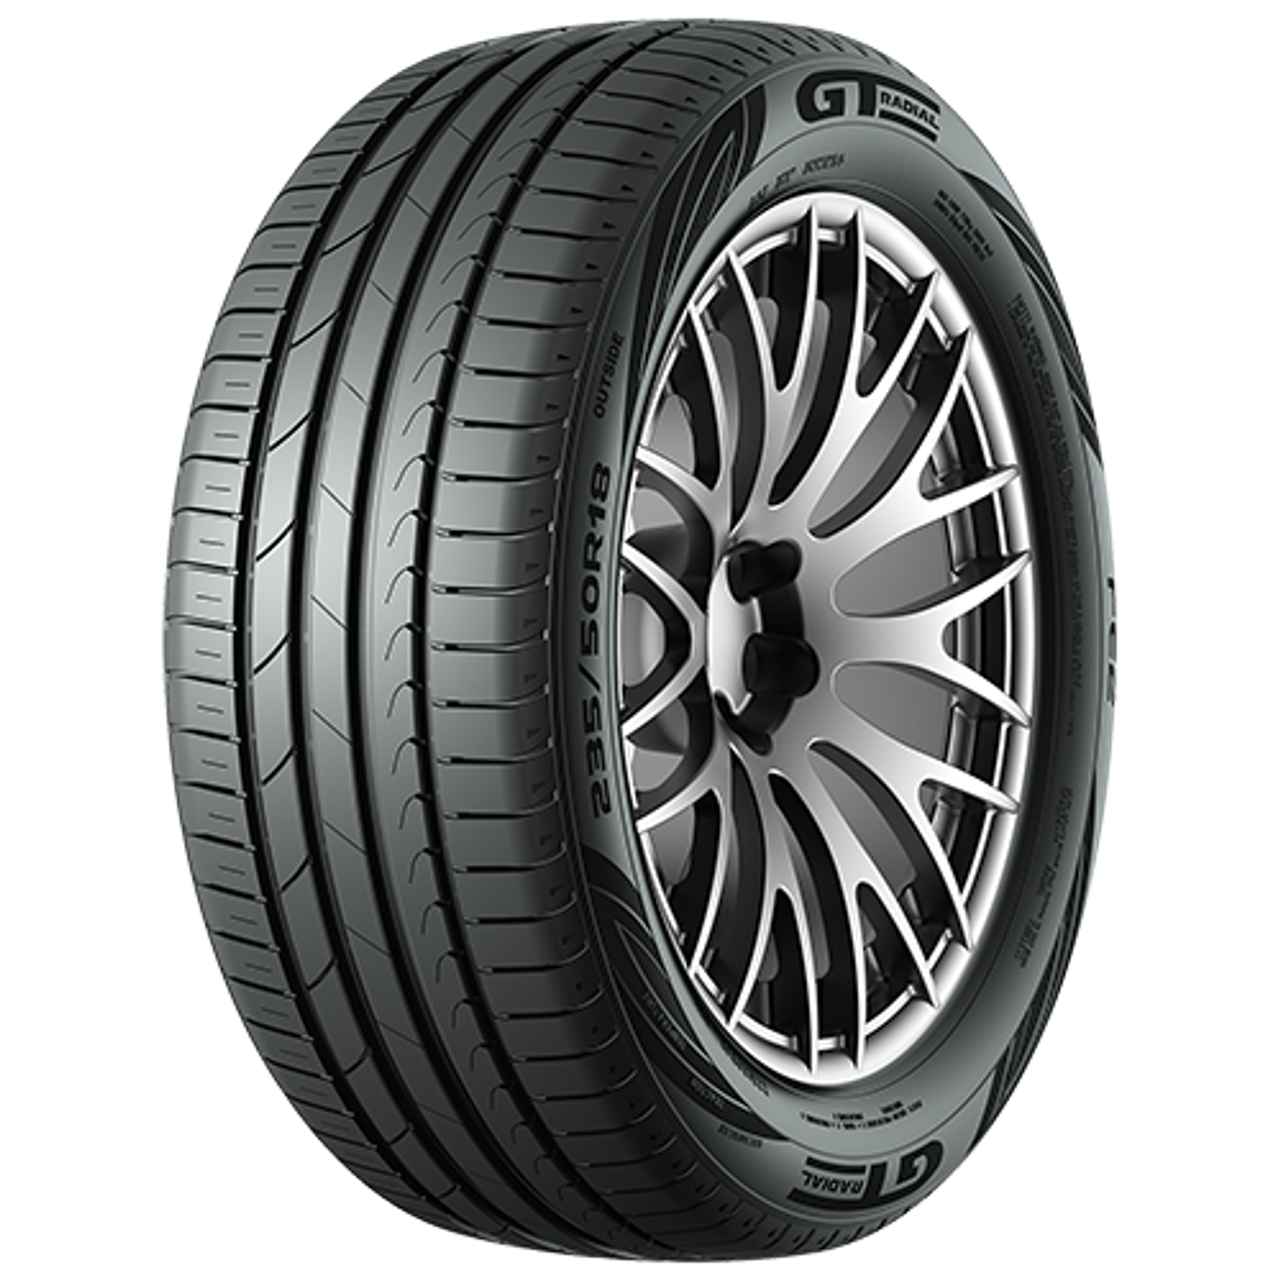 GT-RADIAL FE2 195/60R15 88H BSW